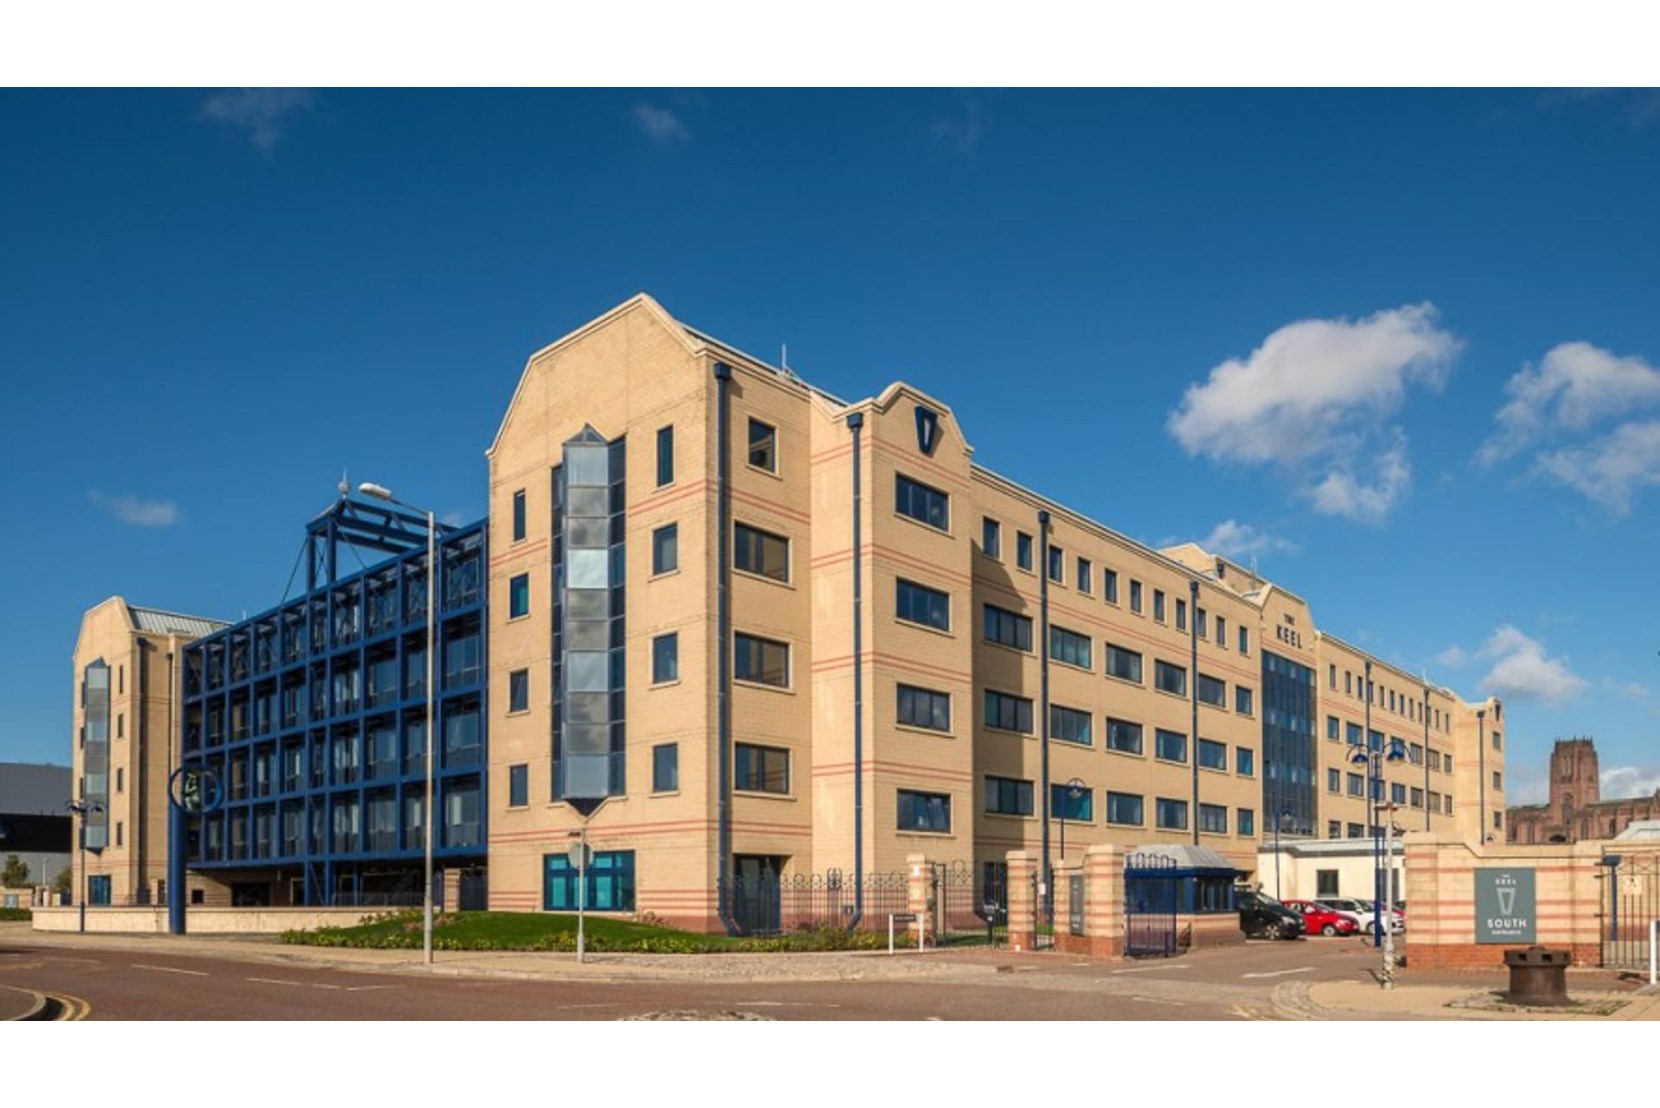 Apartments to Rent by Allsop at The Keel, Liverpool, L3, development panoramic